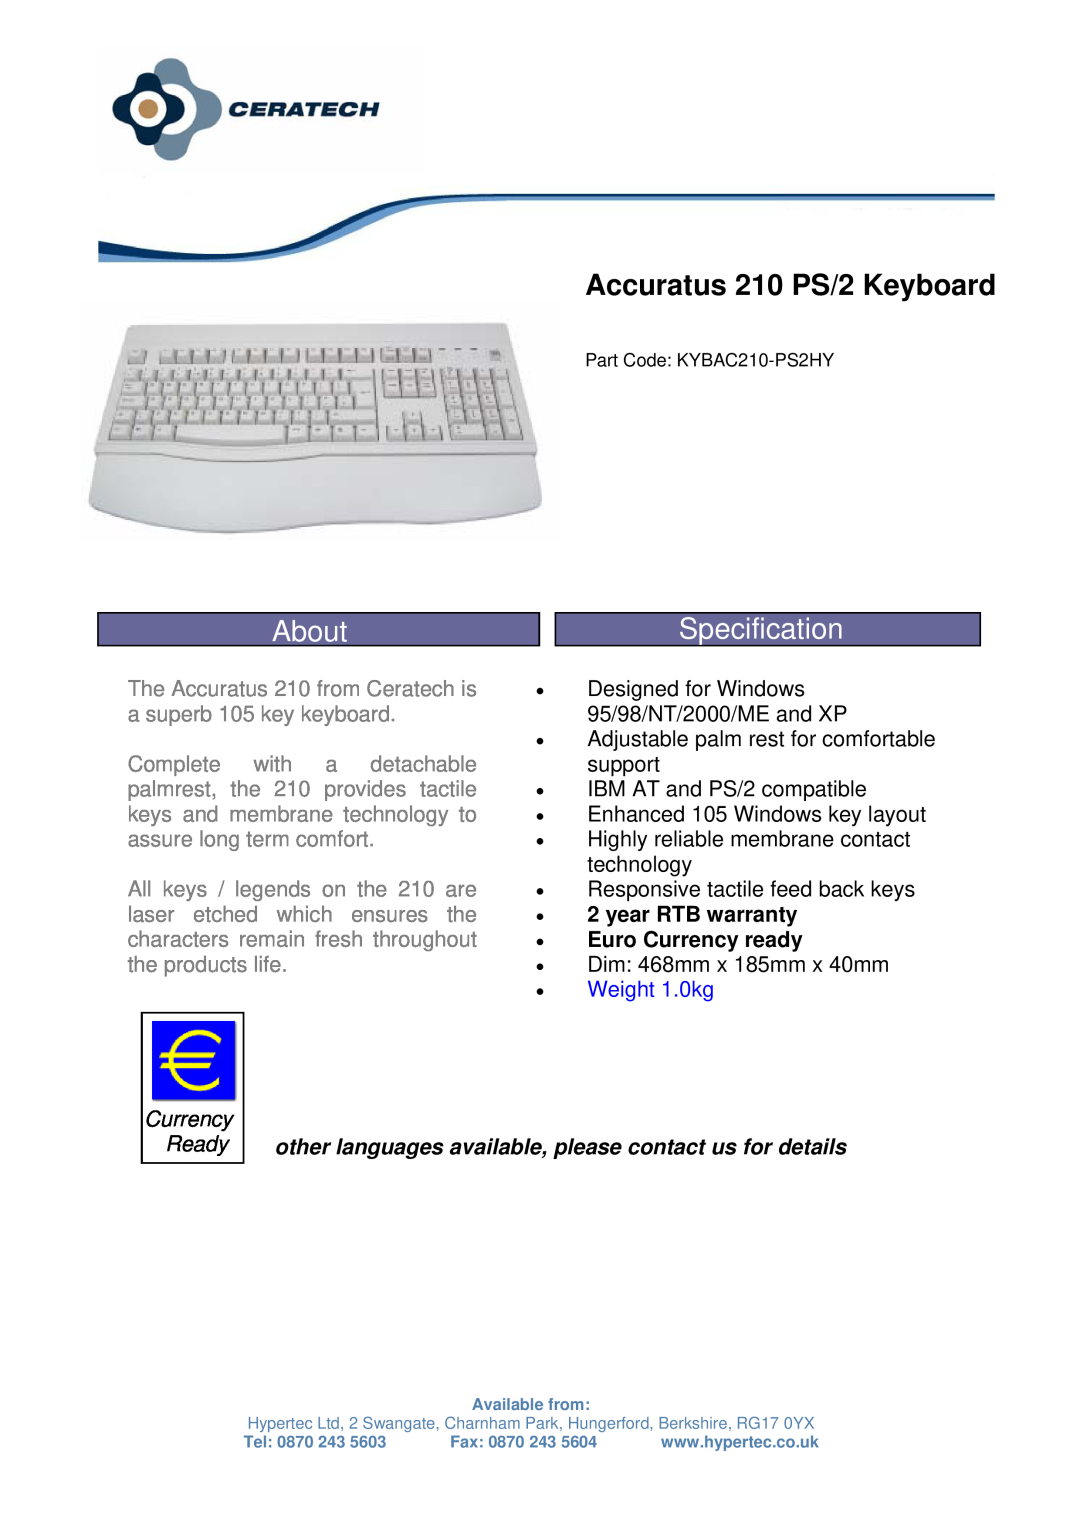 Hypertec KYBAC210-PS2HY warranty About, Accuratus 210 PS/2 Keyboard, Specification, year RTB warranty Euro Currency ready 